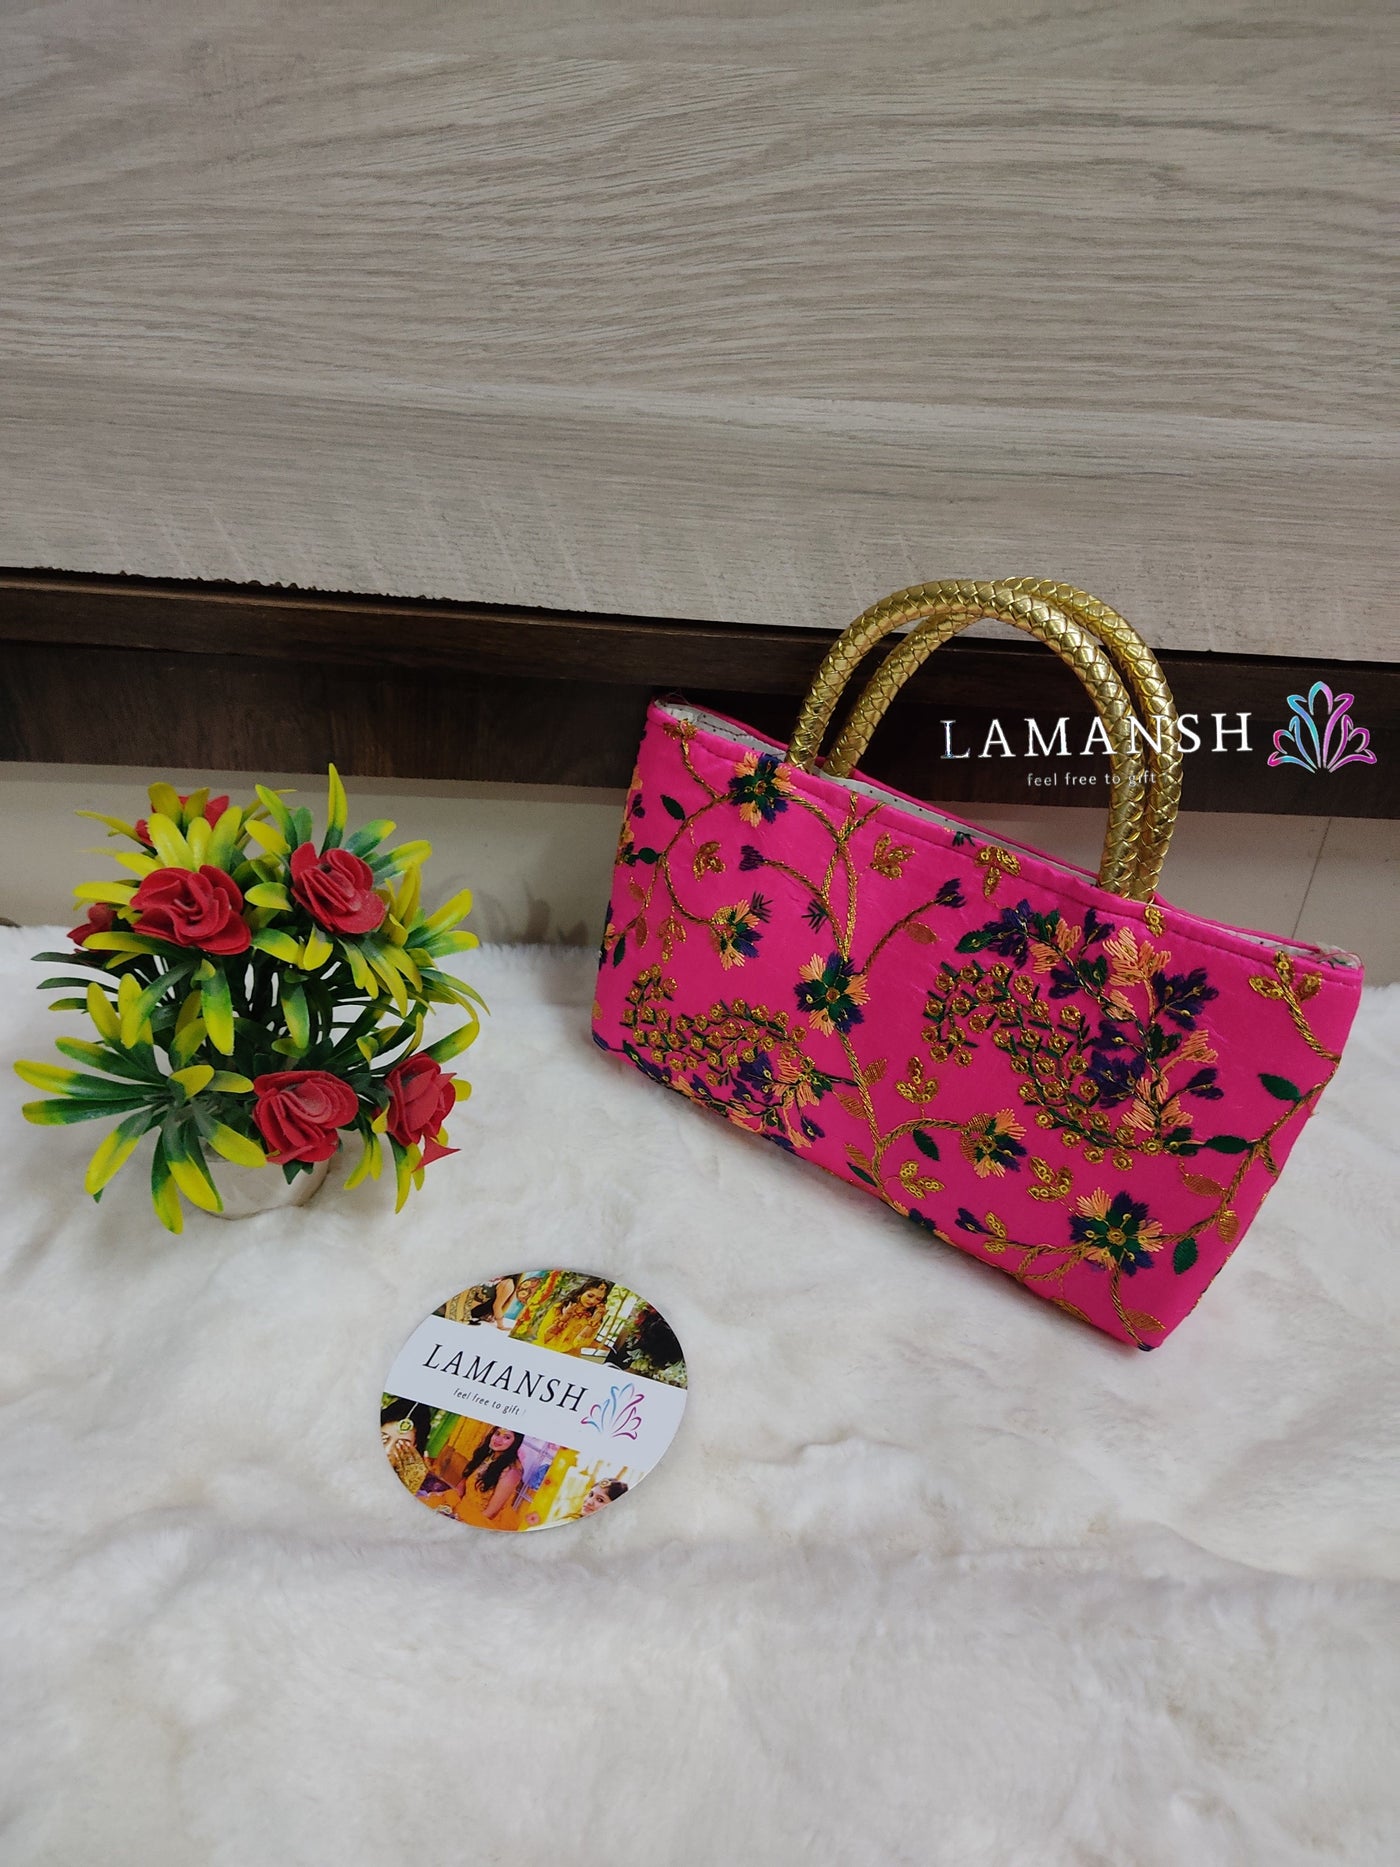 LAMANSH ® hand bags LAMANSH® Embroidered Hand Stitched Hand Bag for Weddings & Parties